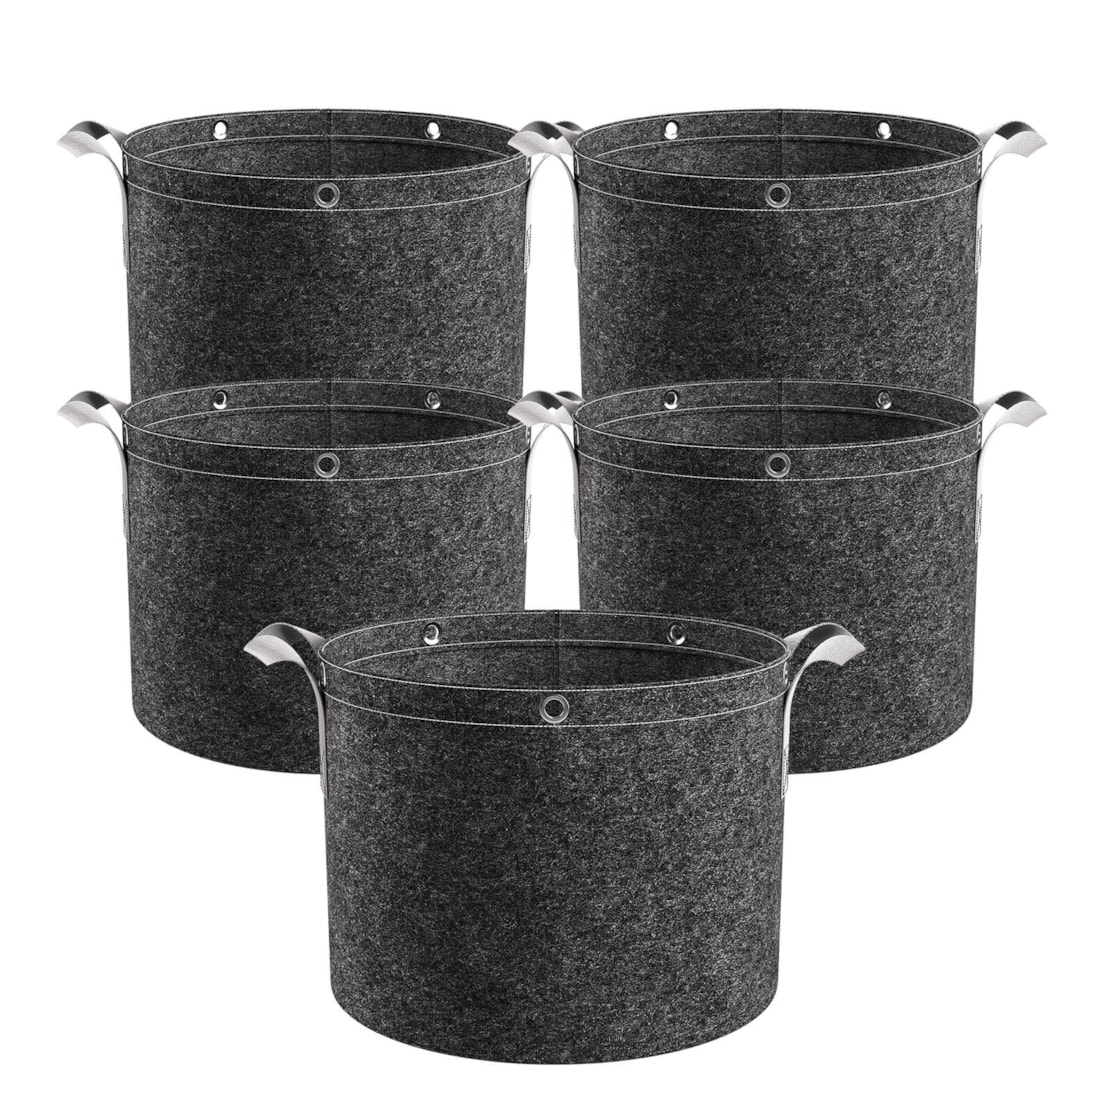 VIVOSUN 10 Gallon Grow Bags 5-Pack Black Thickened Nonwoven Fabric Pots with Handles, Multi-Purpose Rings